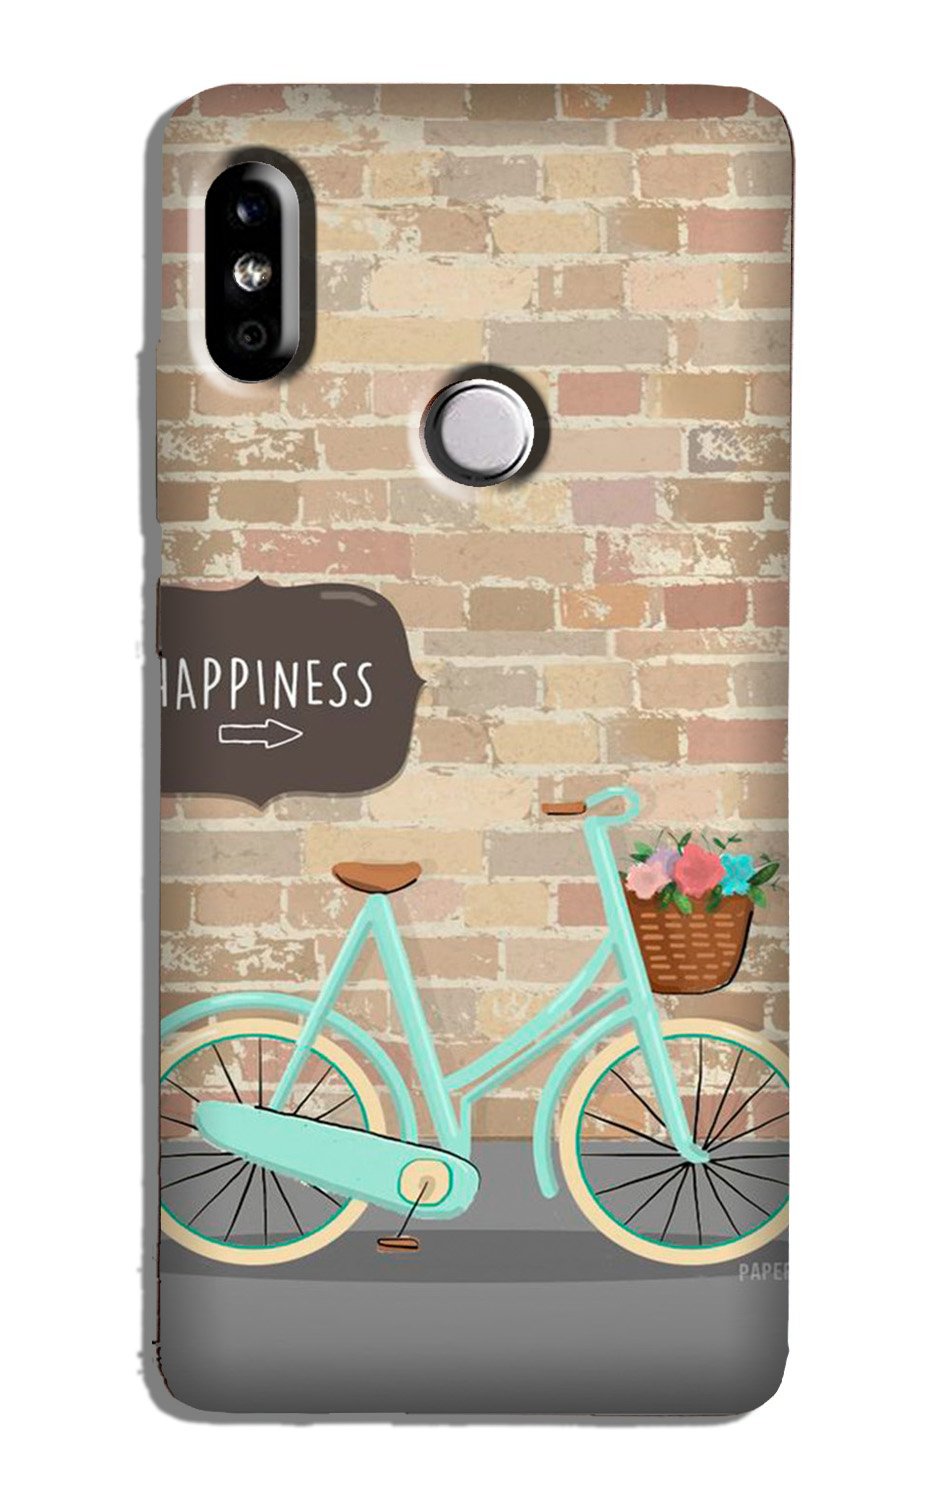 Happiness Case for Redmi Note 5 Pro